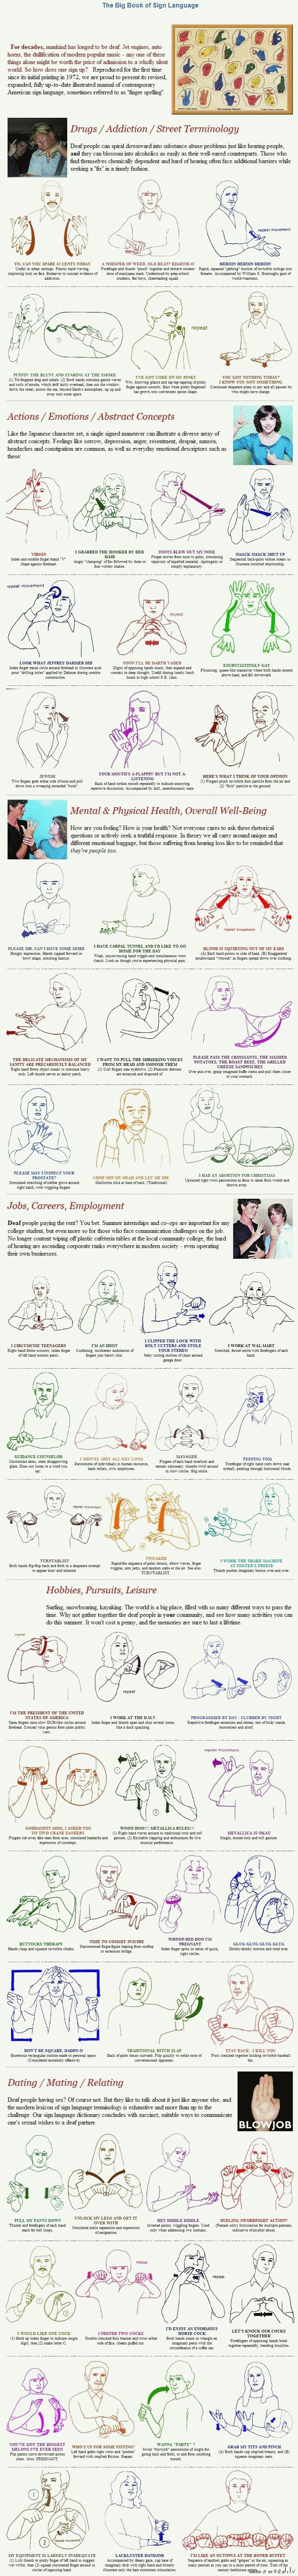 The big book of sign language